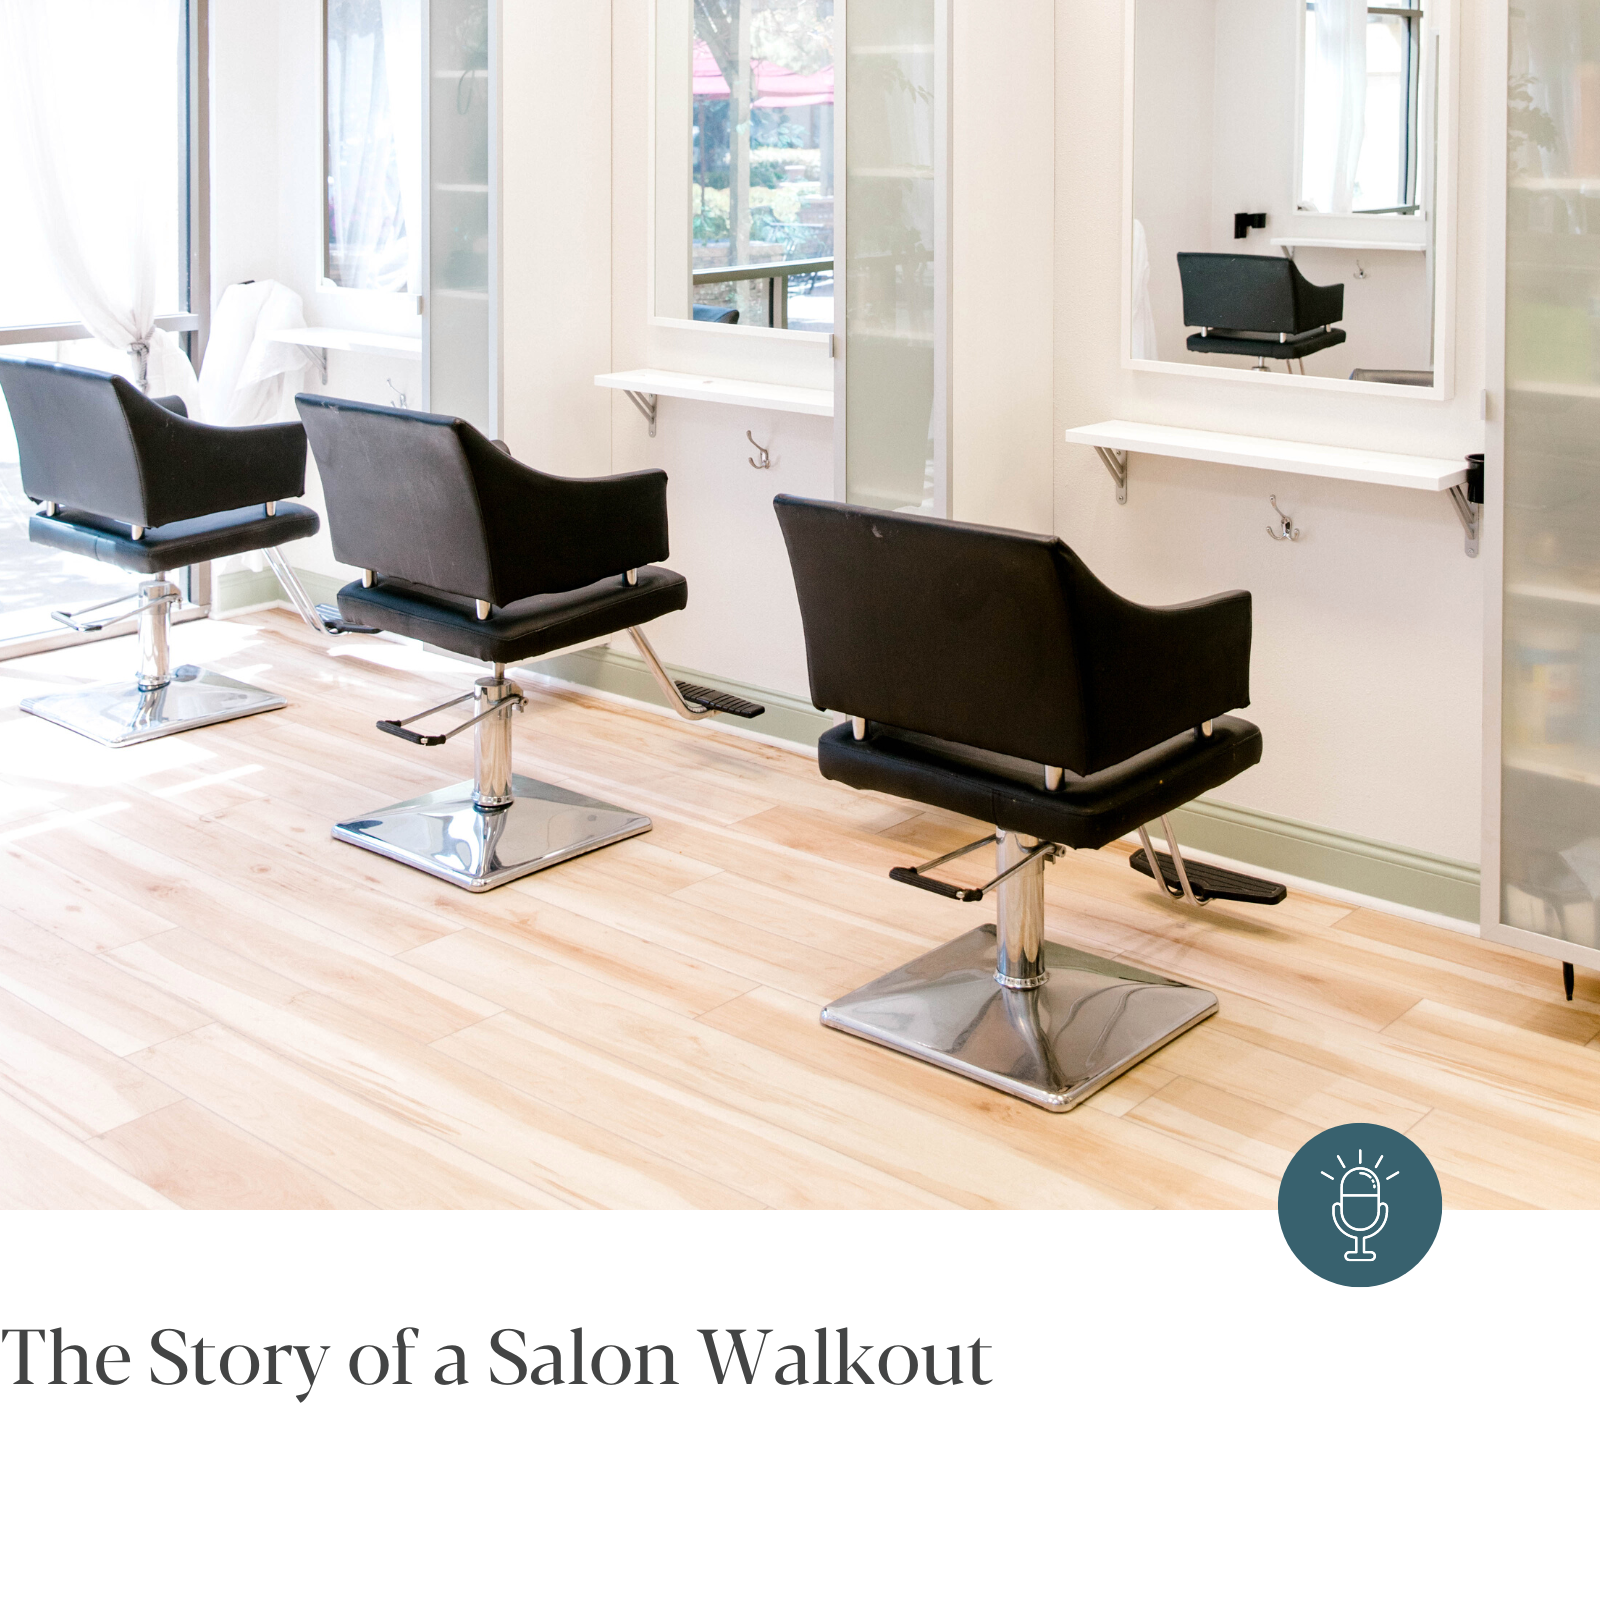 Episode #255 - The Story of a Salon Walkout